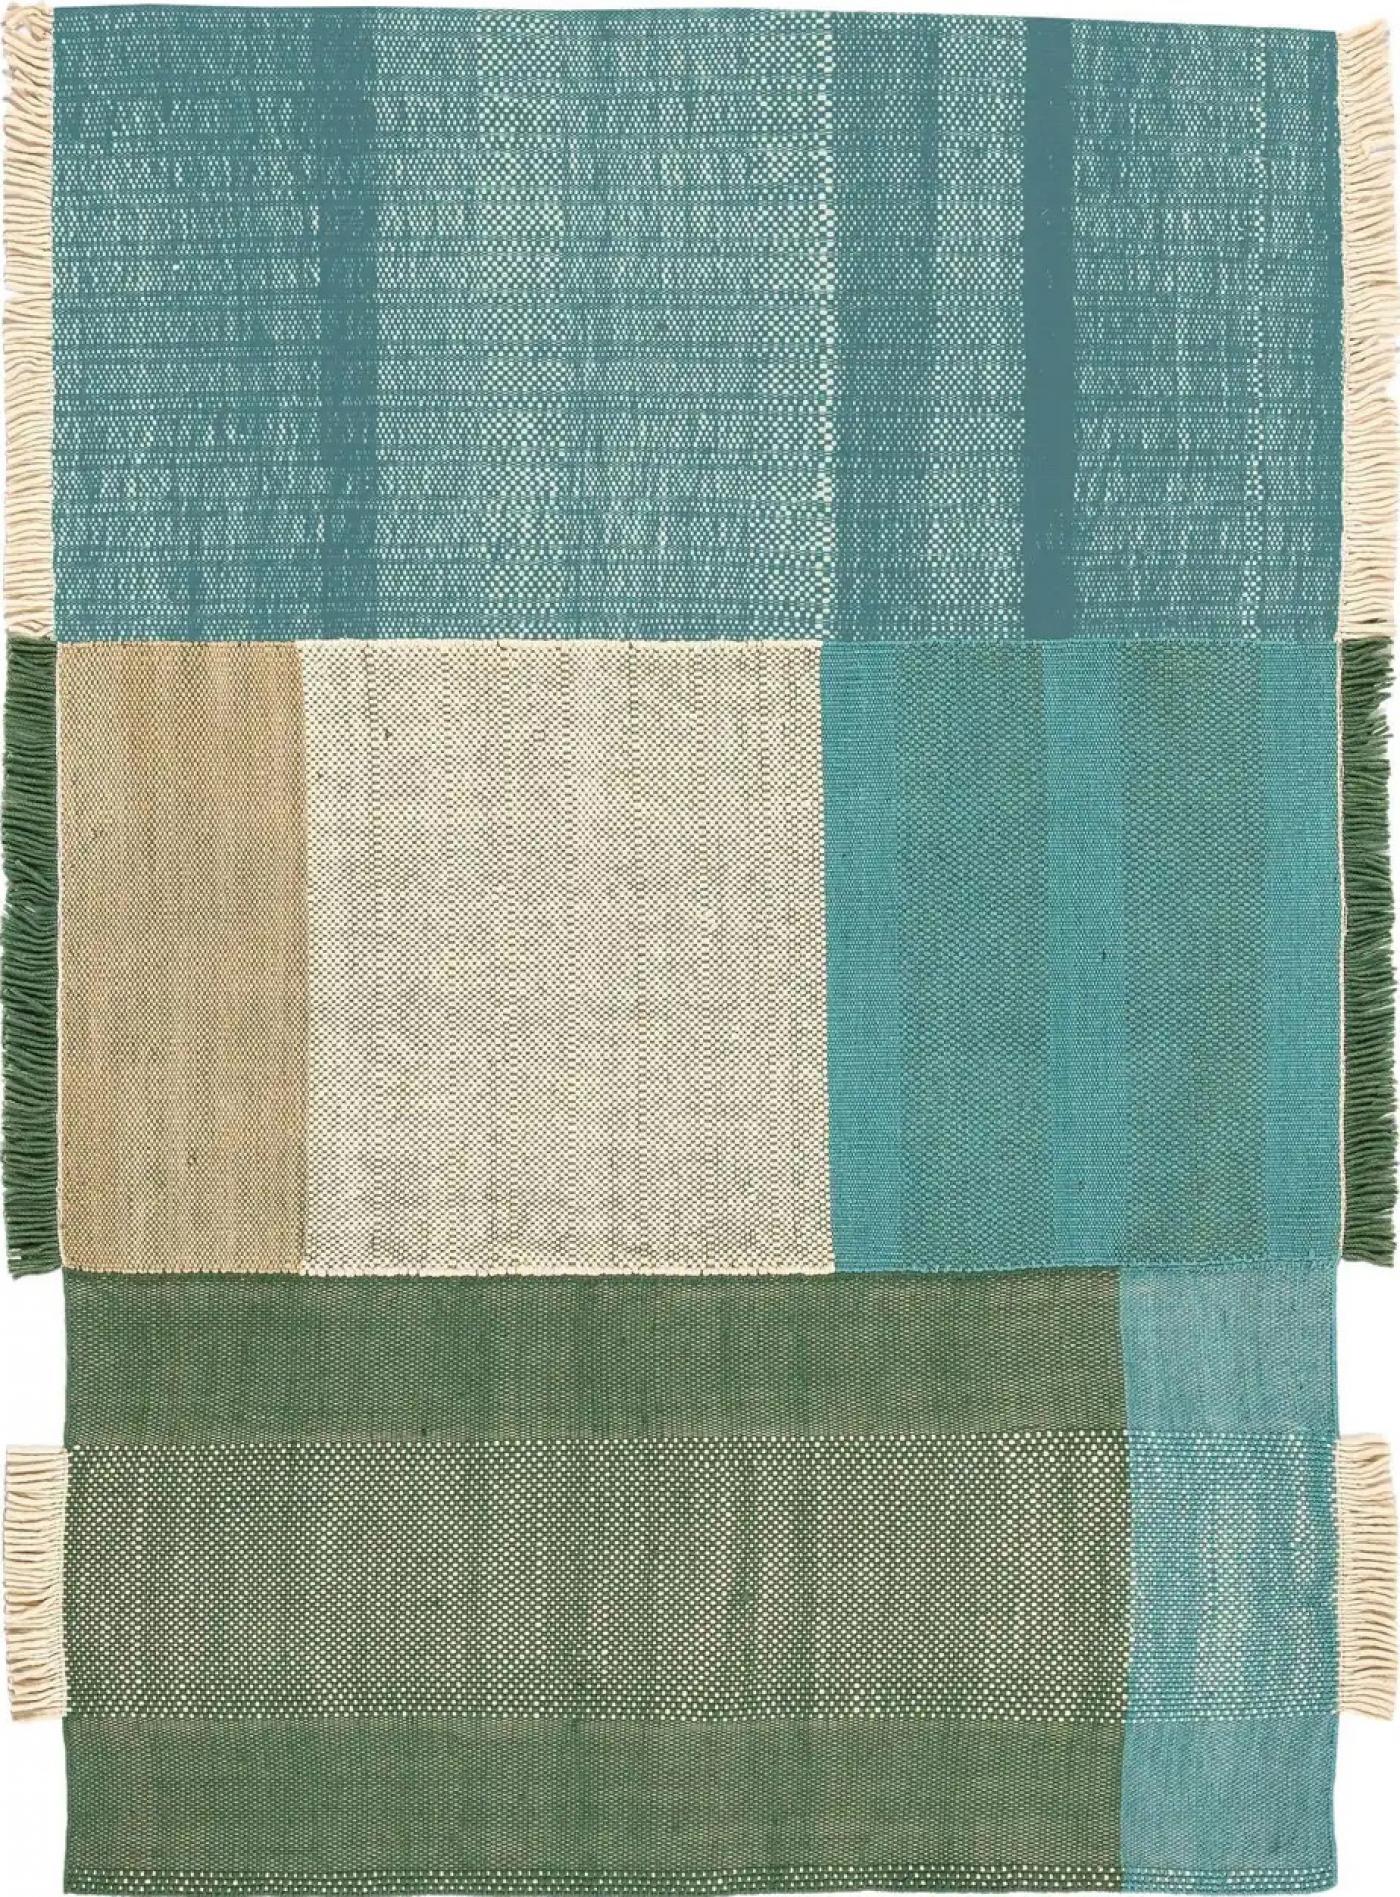 Tres  Handmade area rugs for your home - nanimarquina